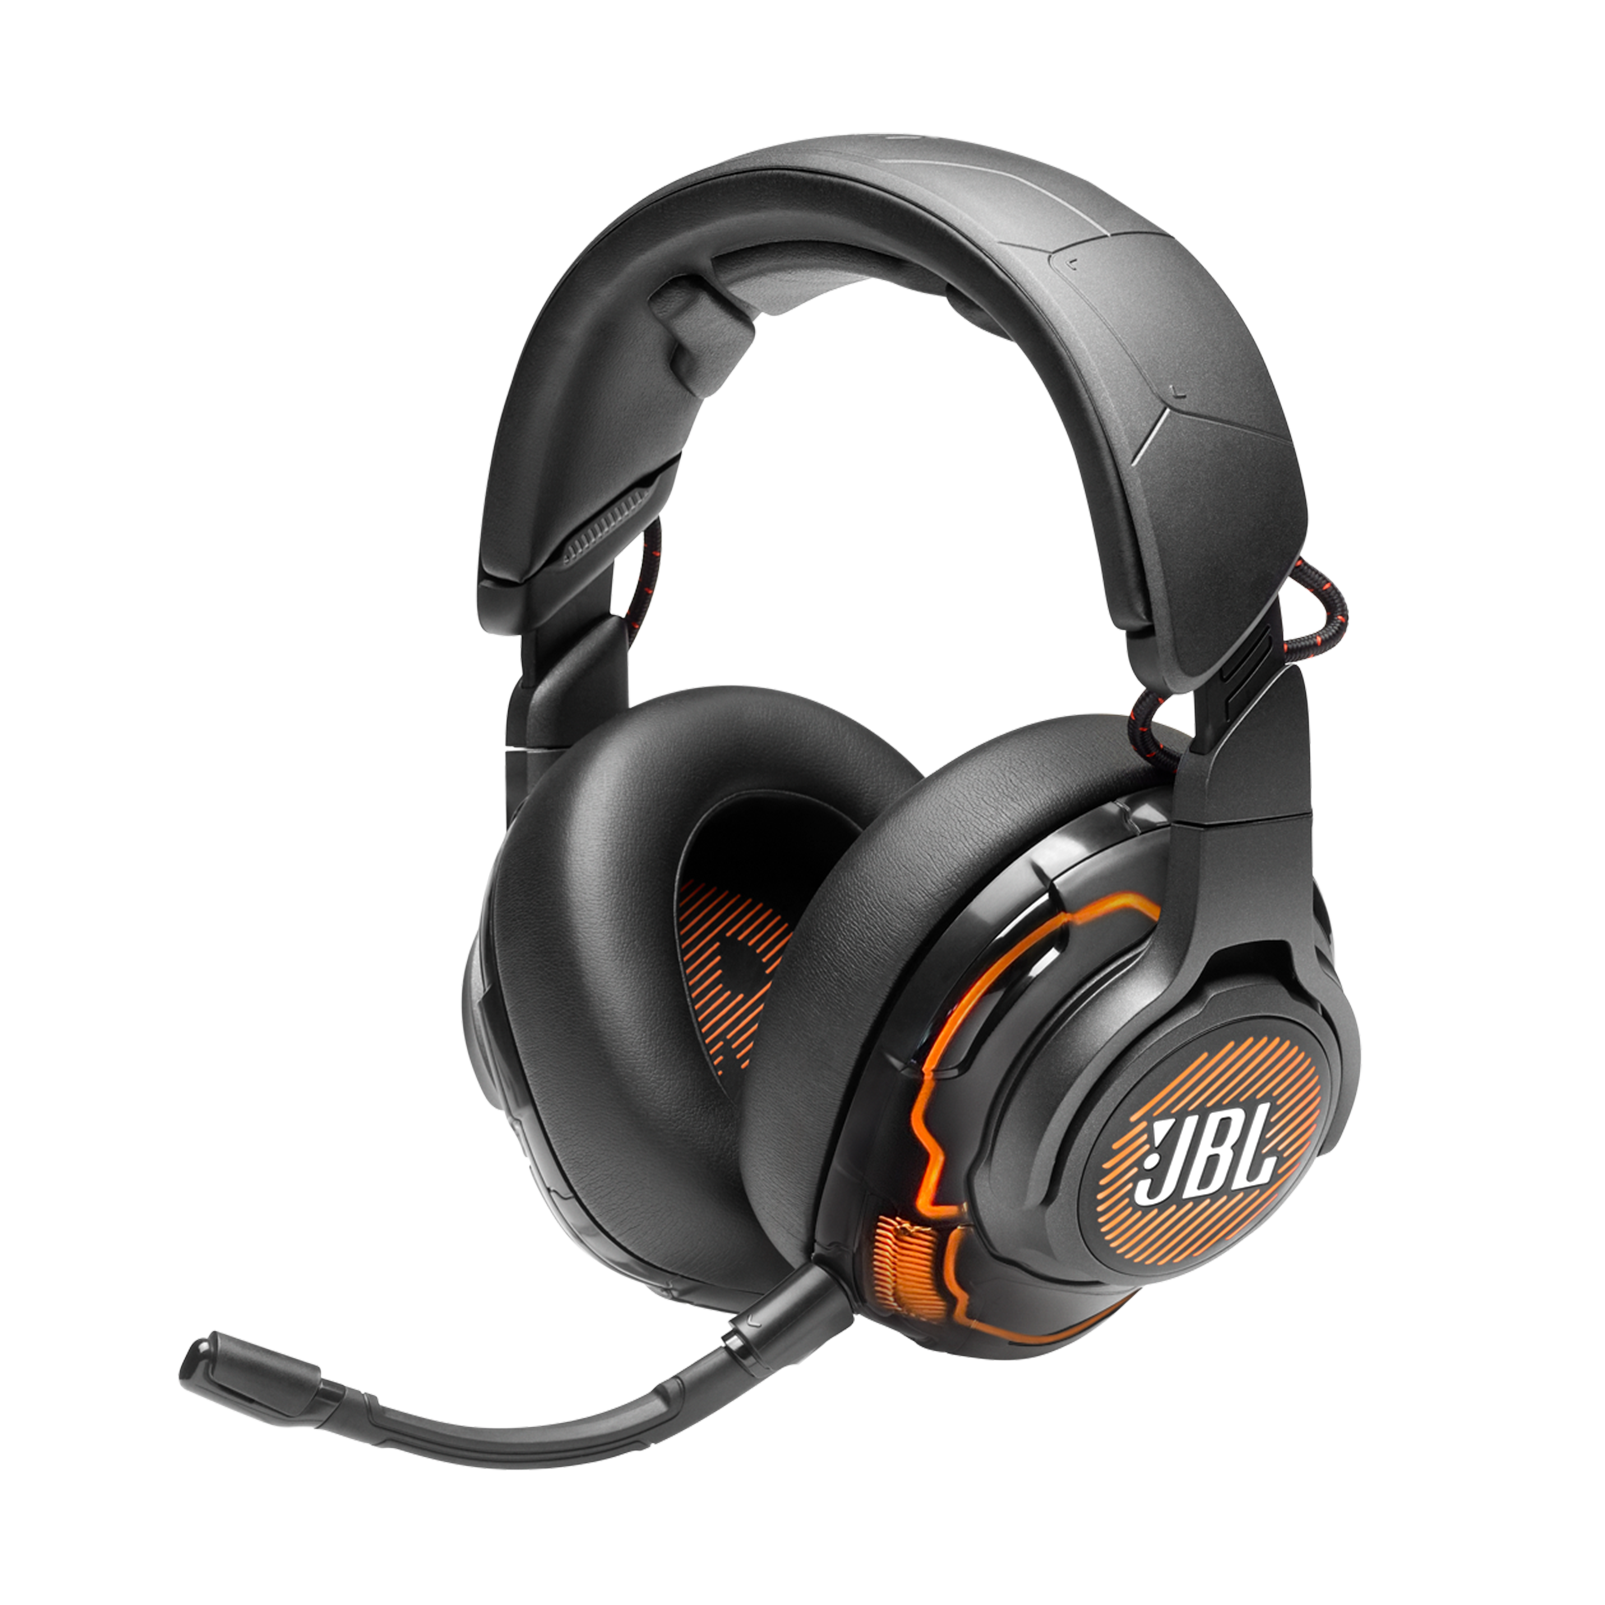 JBL Quantum ONE - Black - USB Wired Over-Ear Professional PC Gaming Headset with Head-Tracking Enhanced QuantumSPHERE 360 - Hero